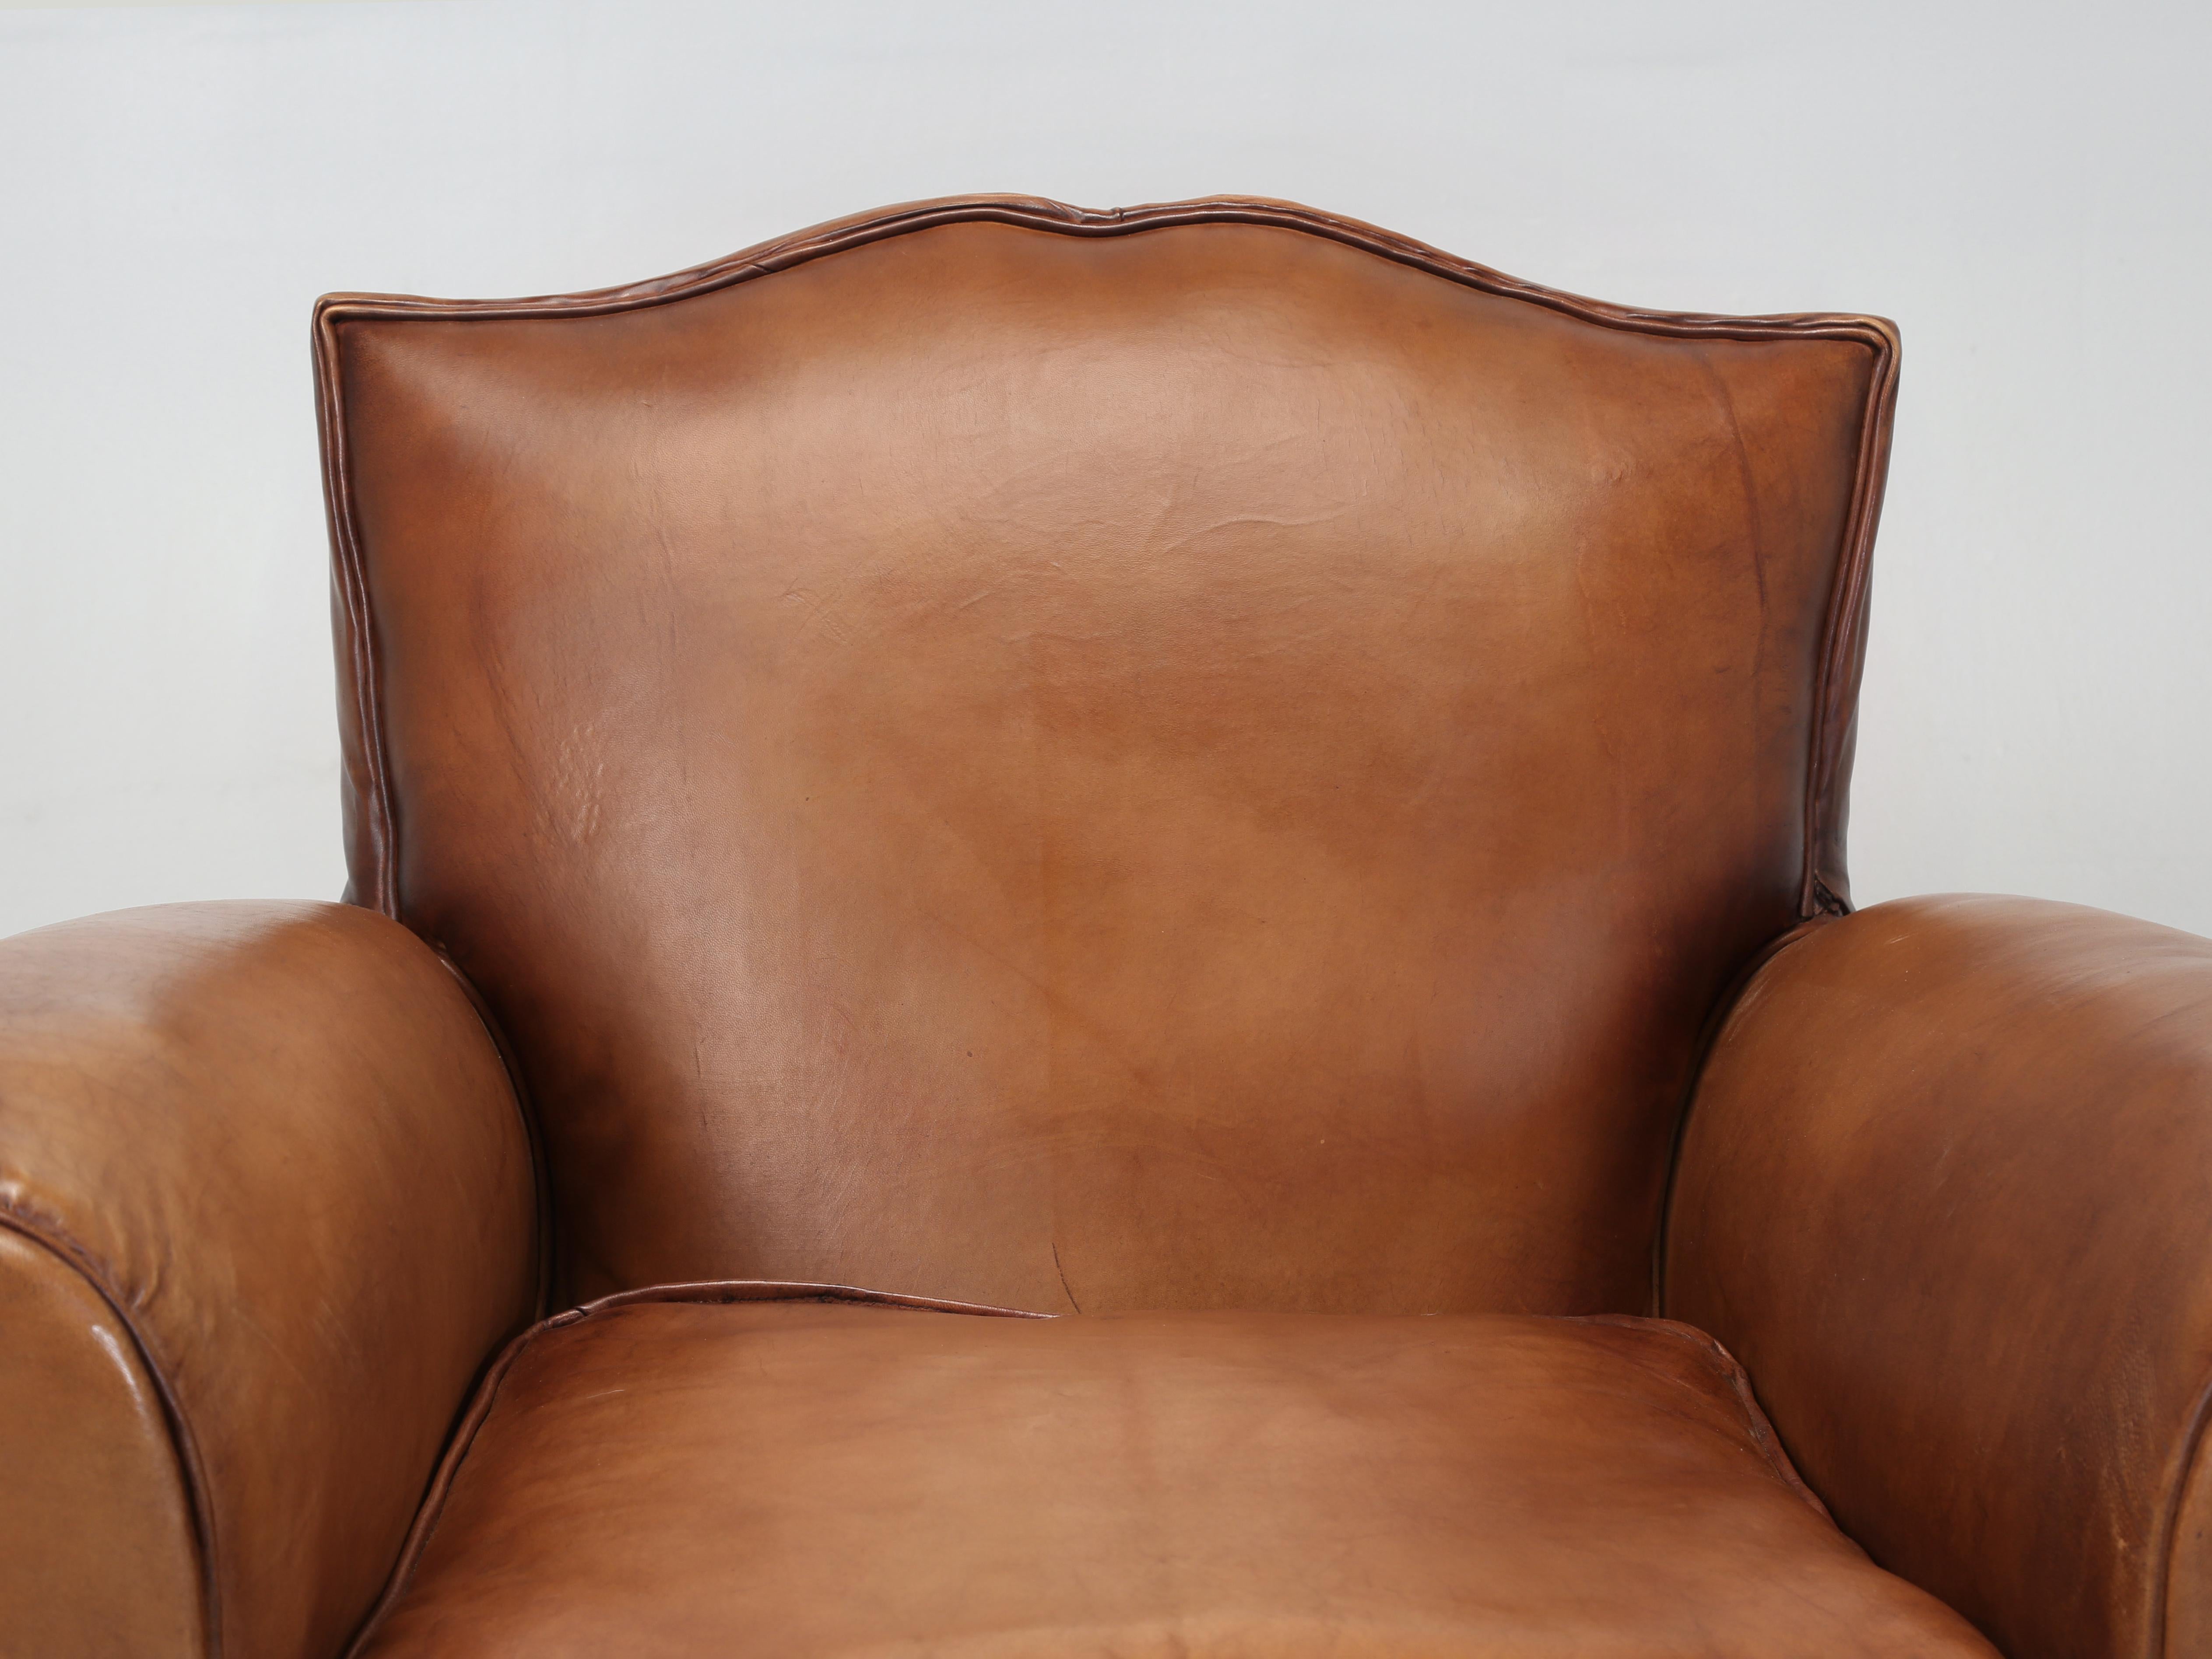 French Leather Club Chair Restored in Toulouse, France with all New Sheep Leather. Normally this is where I would be telling you how our Old Plank Upholstery department completely disassembled the Club Chair and rebuilt the leather Club Chair from